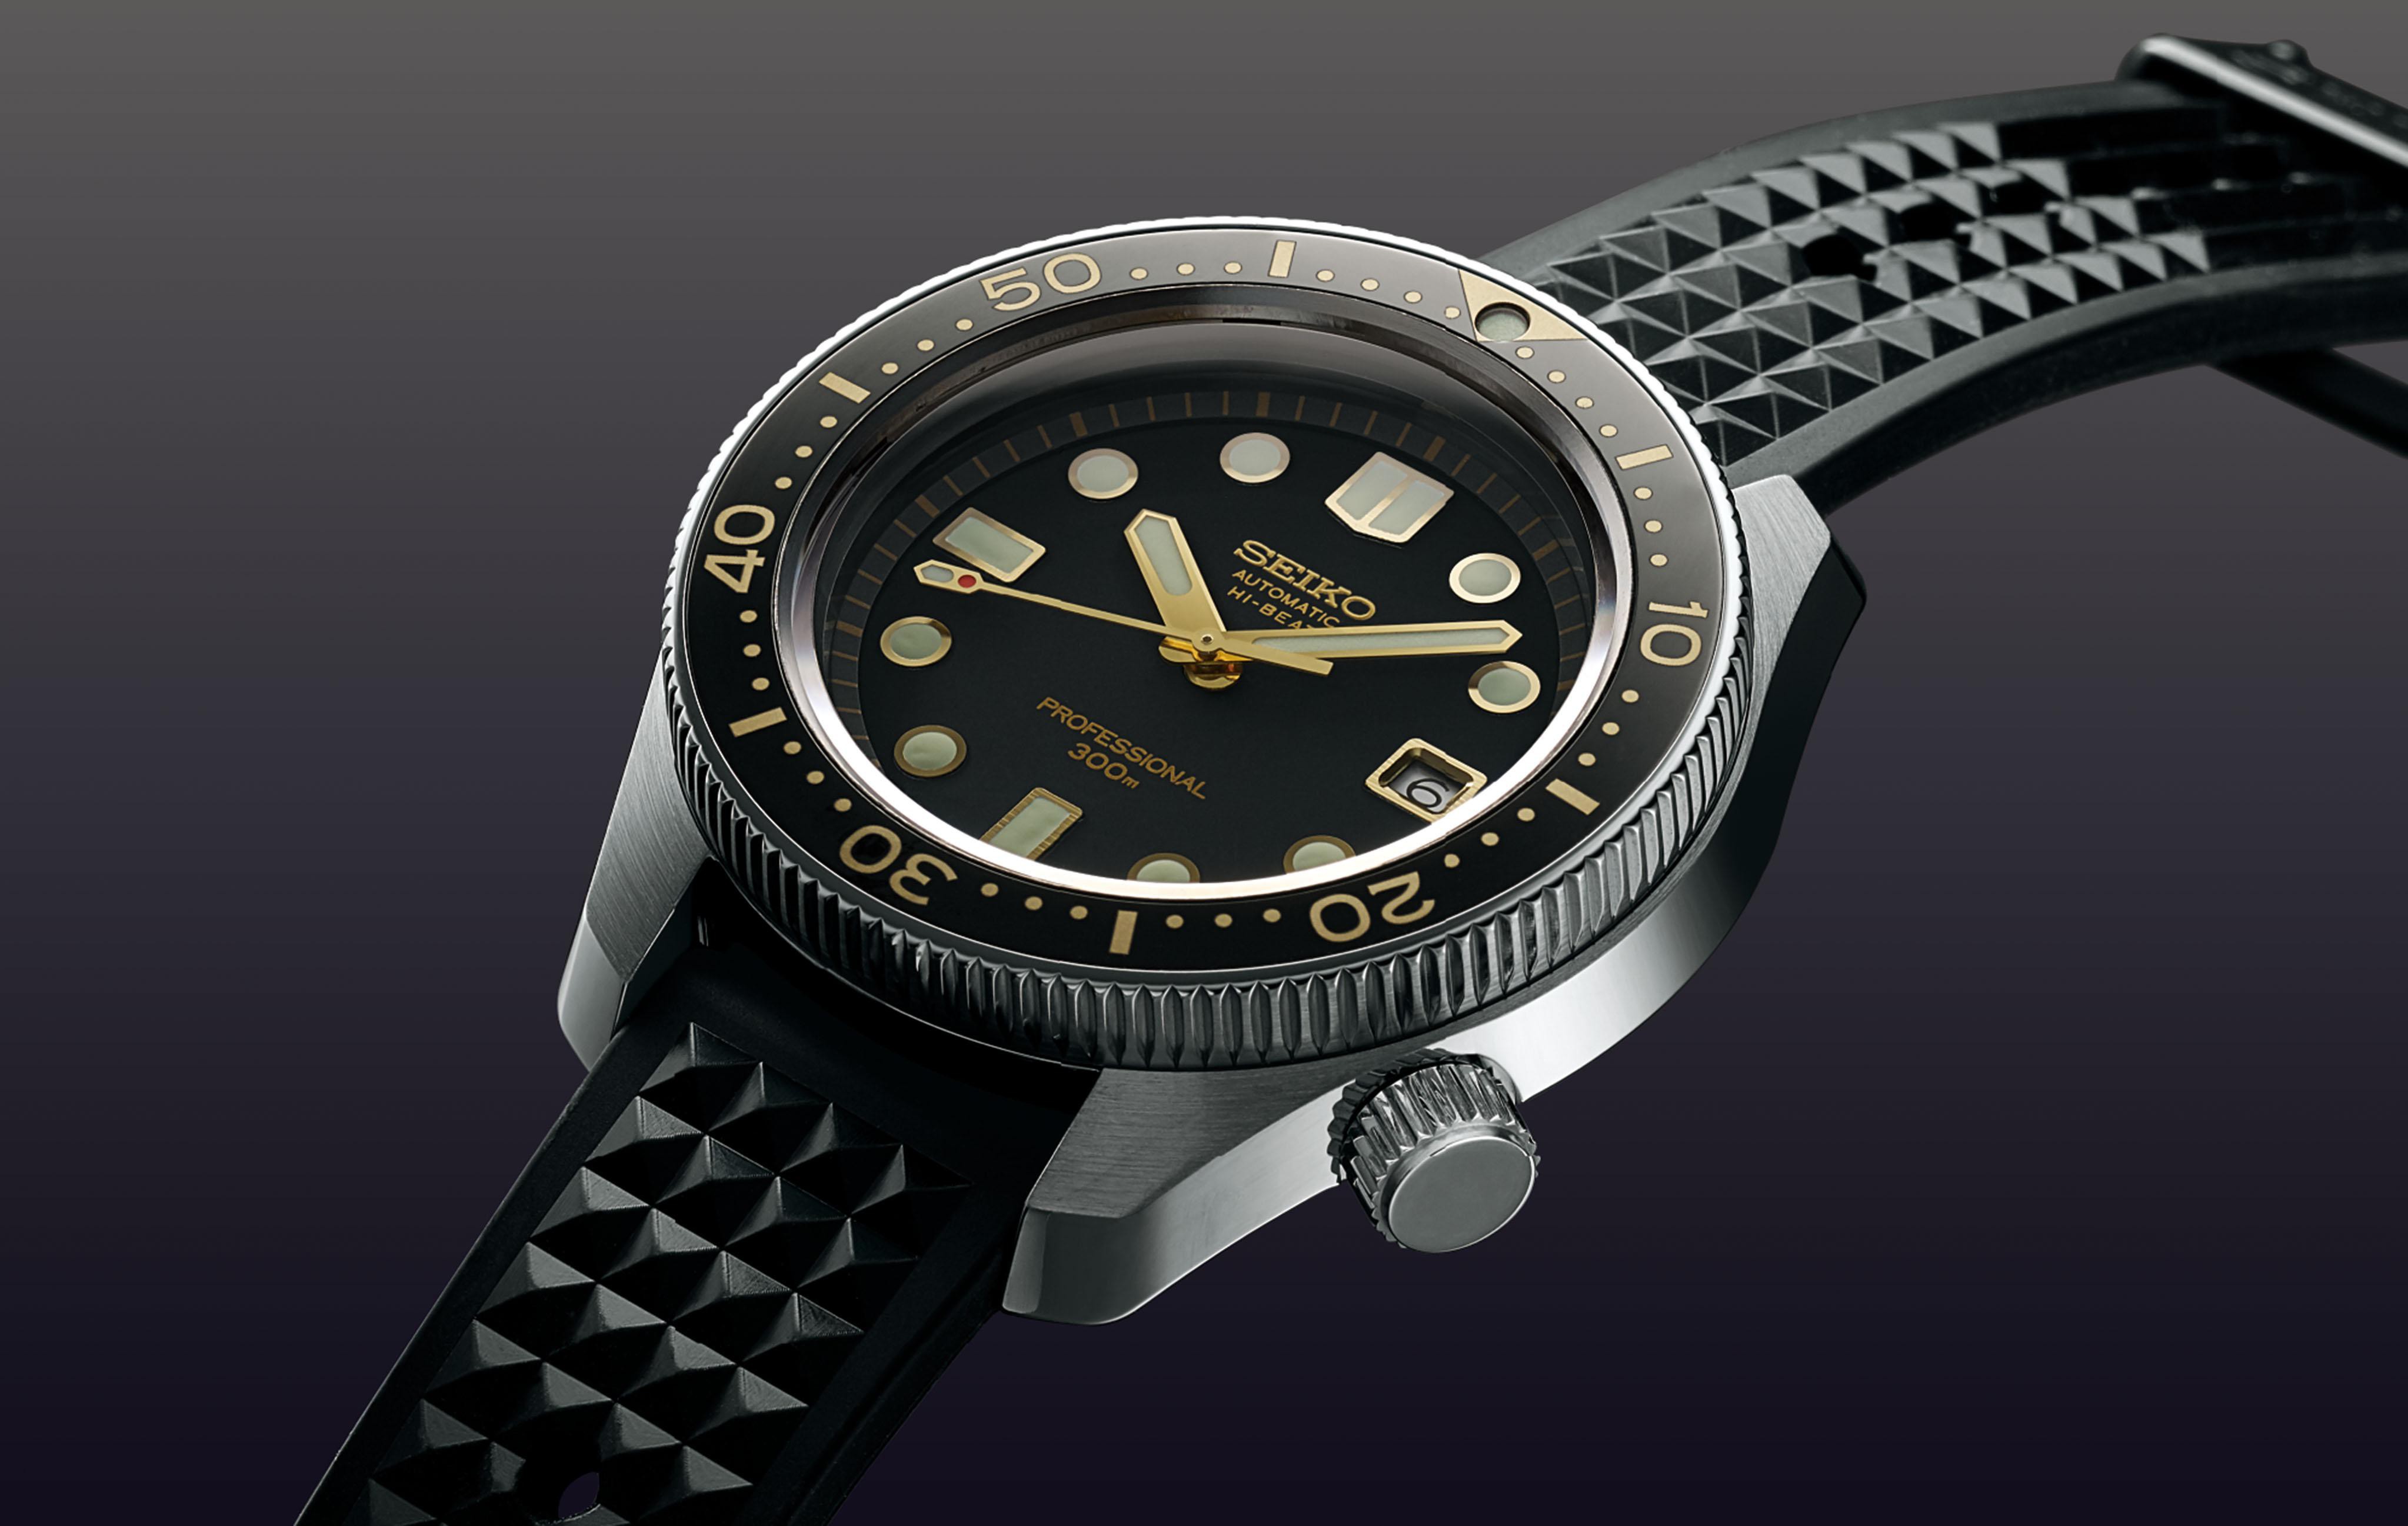 Seiko's expertise in diver's watches is celebrated in the new Prospex  collection | Seiko Watch Corporation